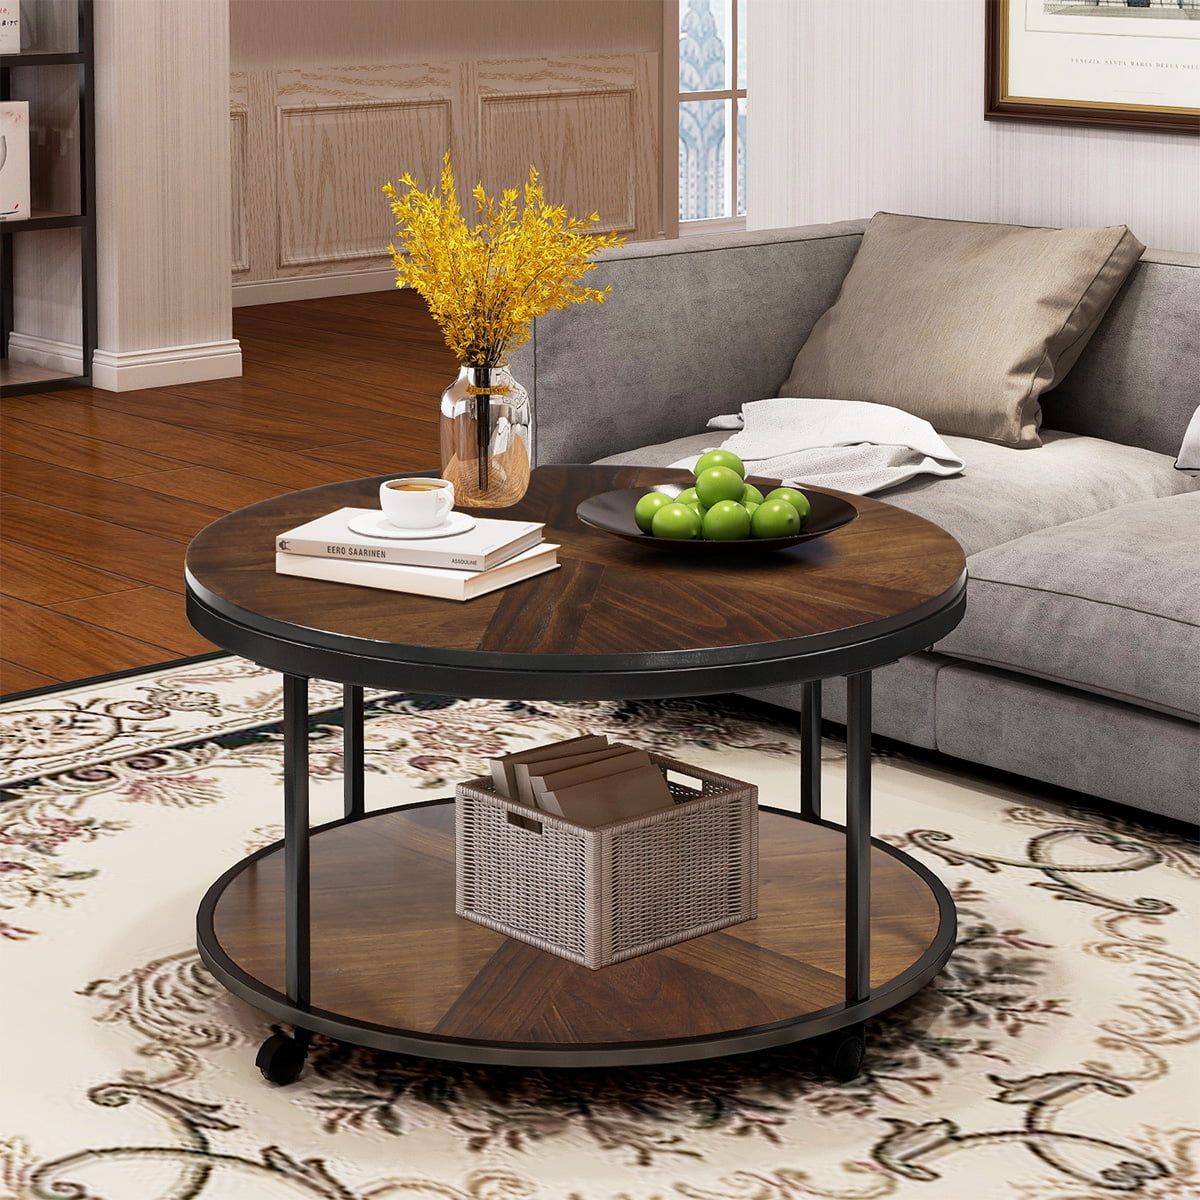 Sentern Round Coffee Table With Caster Wheels And Unique Textured Within Coffee Tables With Casters (View 2 of 15)